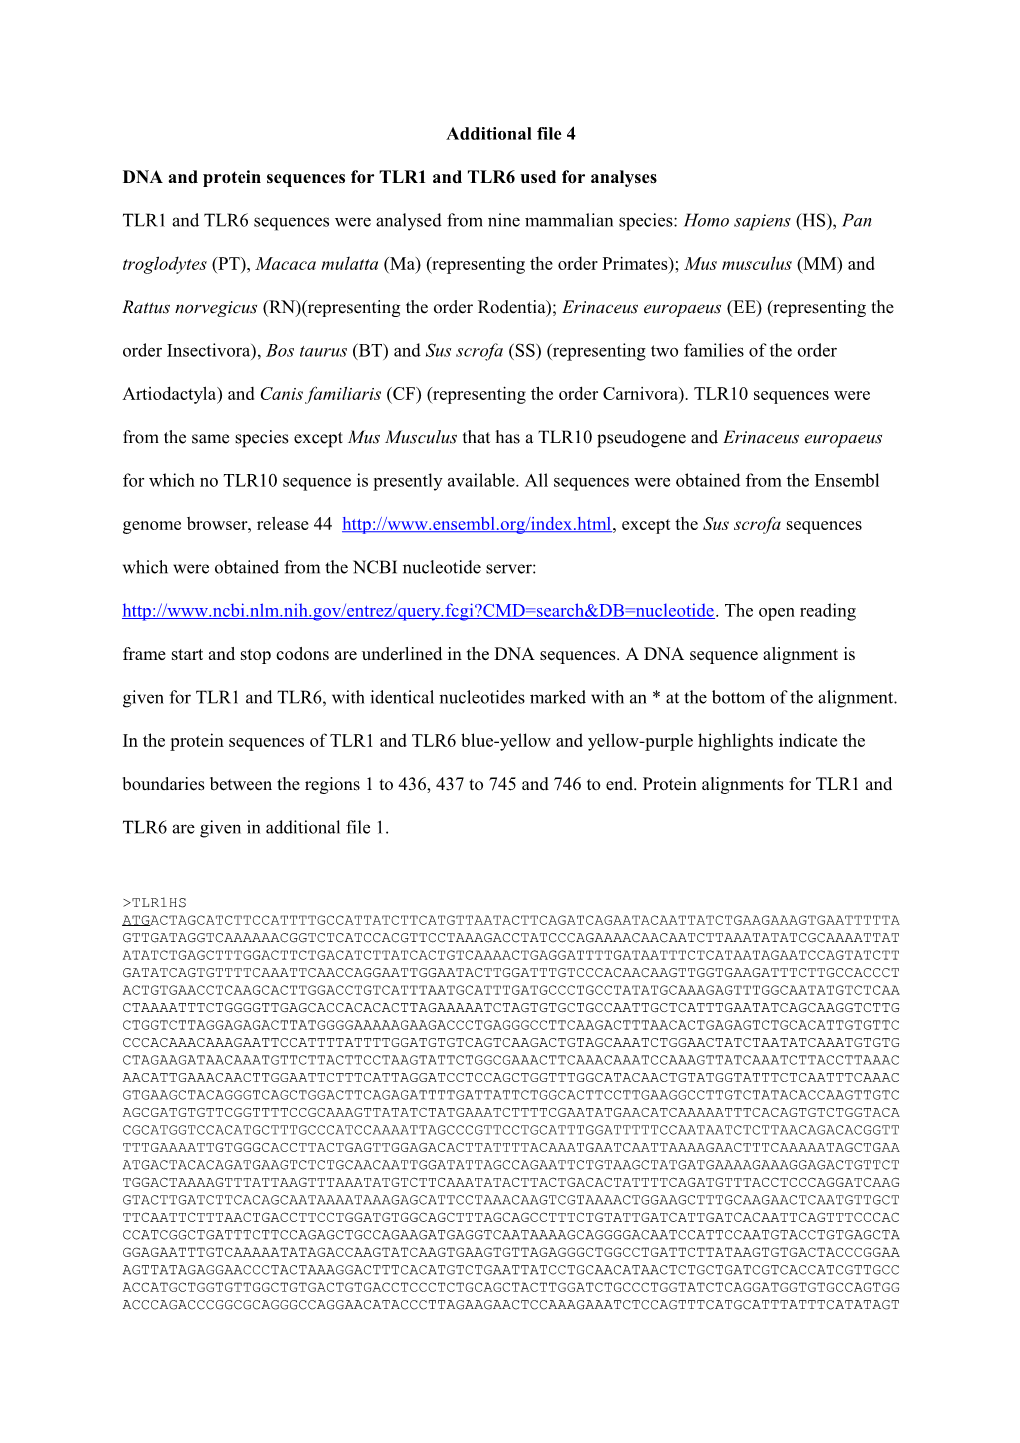 DNA and Protein Sequences for TLR1 and TLR6 Used for Analyses